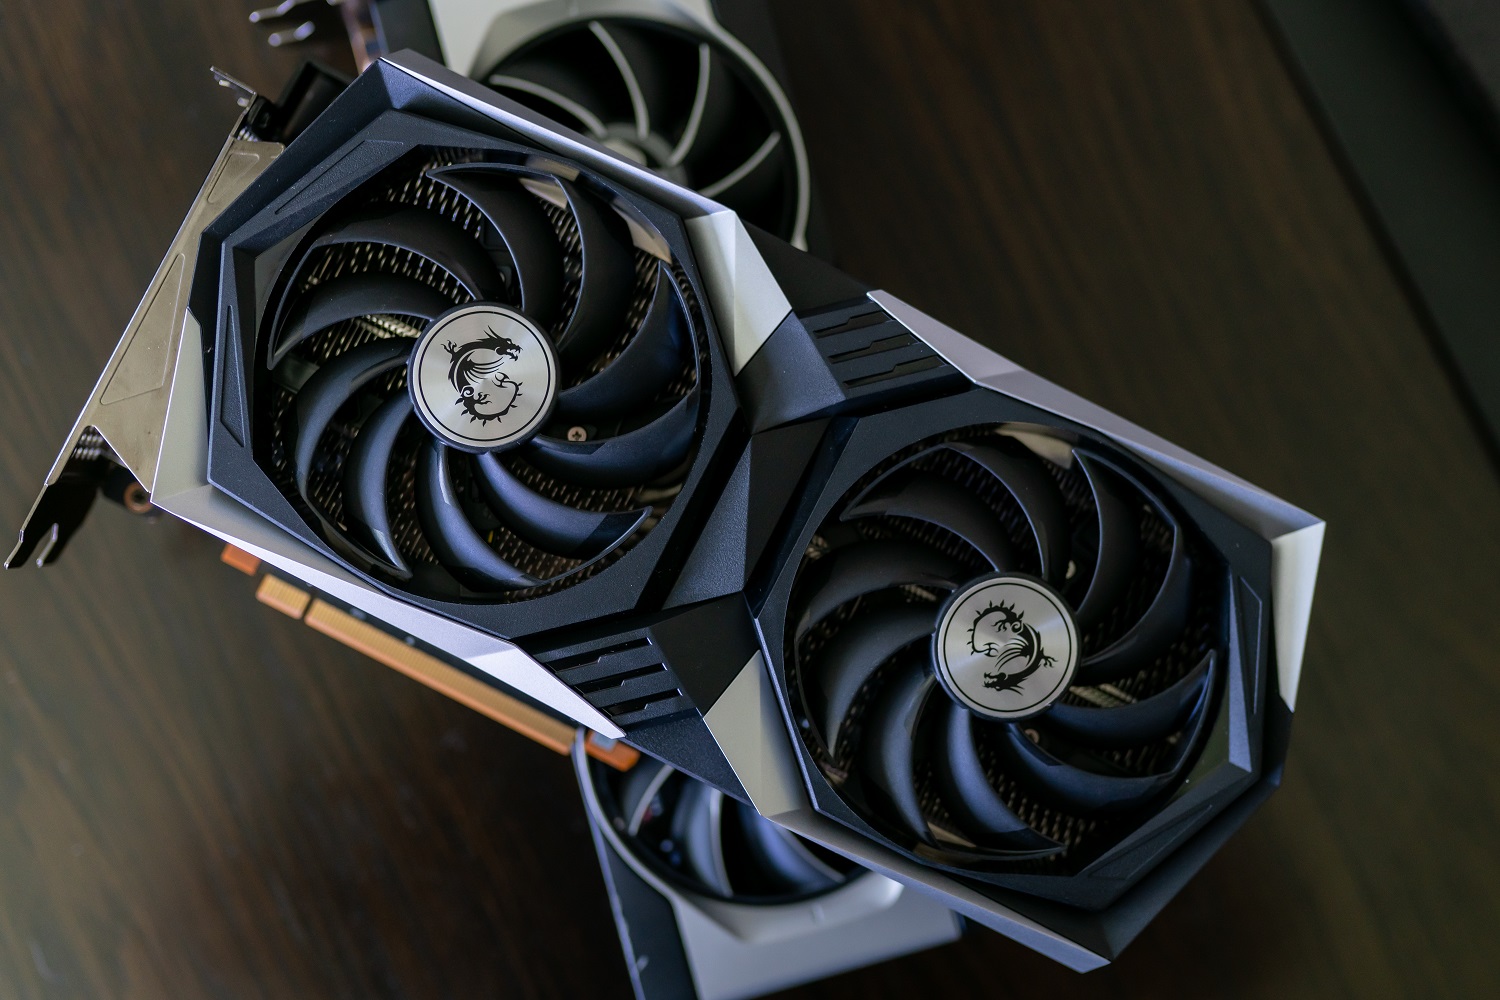 AMD Radeon RX 6600 XT review: Killer 1080p with pandemic pricing